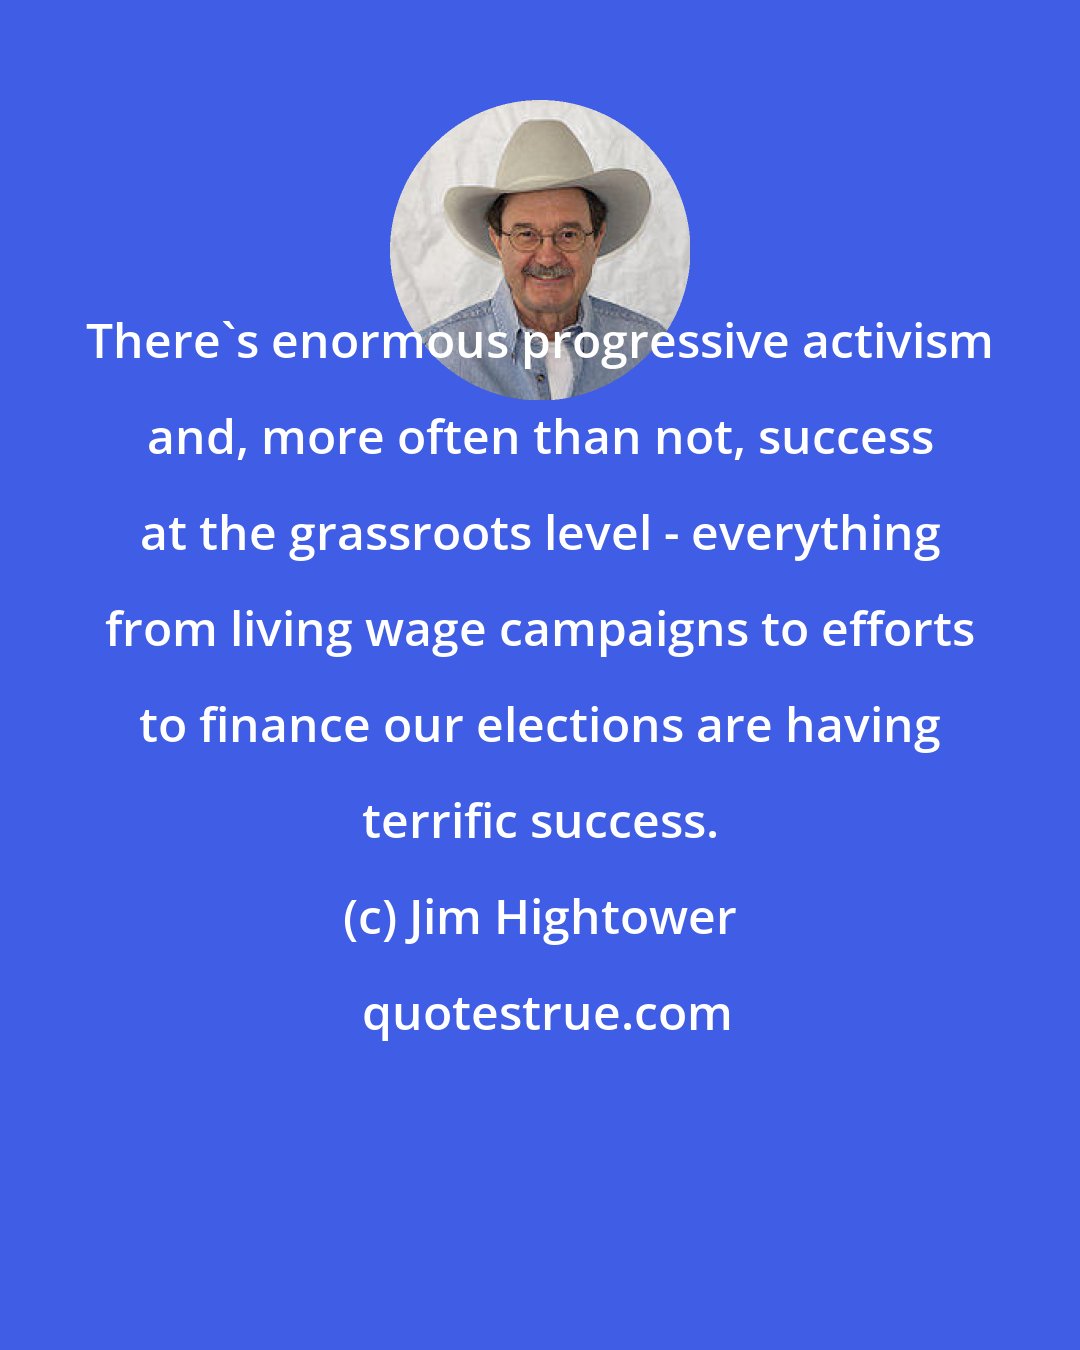 Jim Hightower: There's enormous progressive activism and, more often than not, success at the grassroots level - everything from living wage campaigns to efforts to finance our elections are having terrific success.